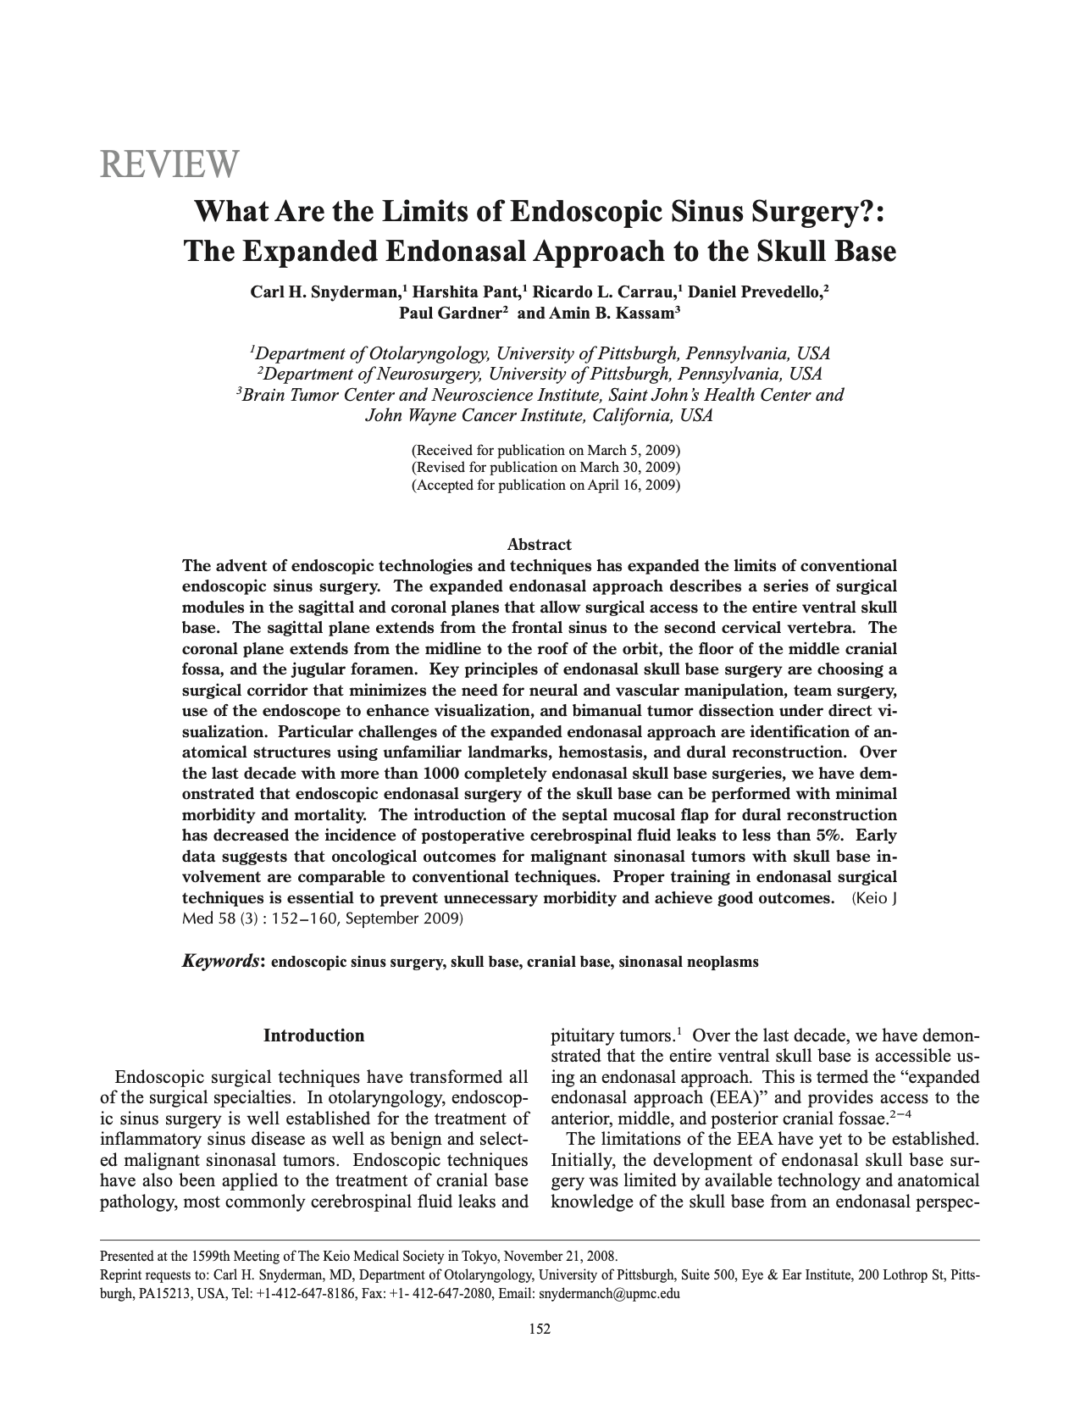 What Are the Limits of Endoscopic Sinus Surgery?: The Expanded Endonasal Approach to the Skull Base